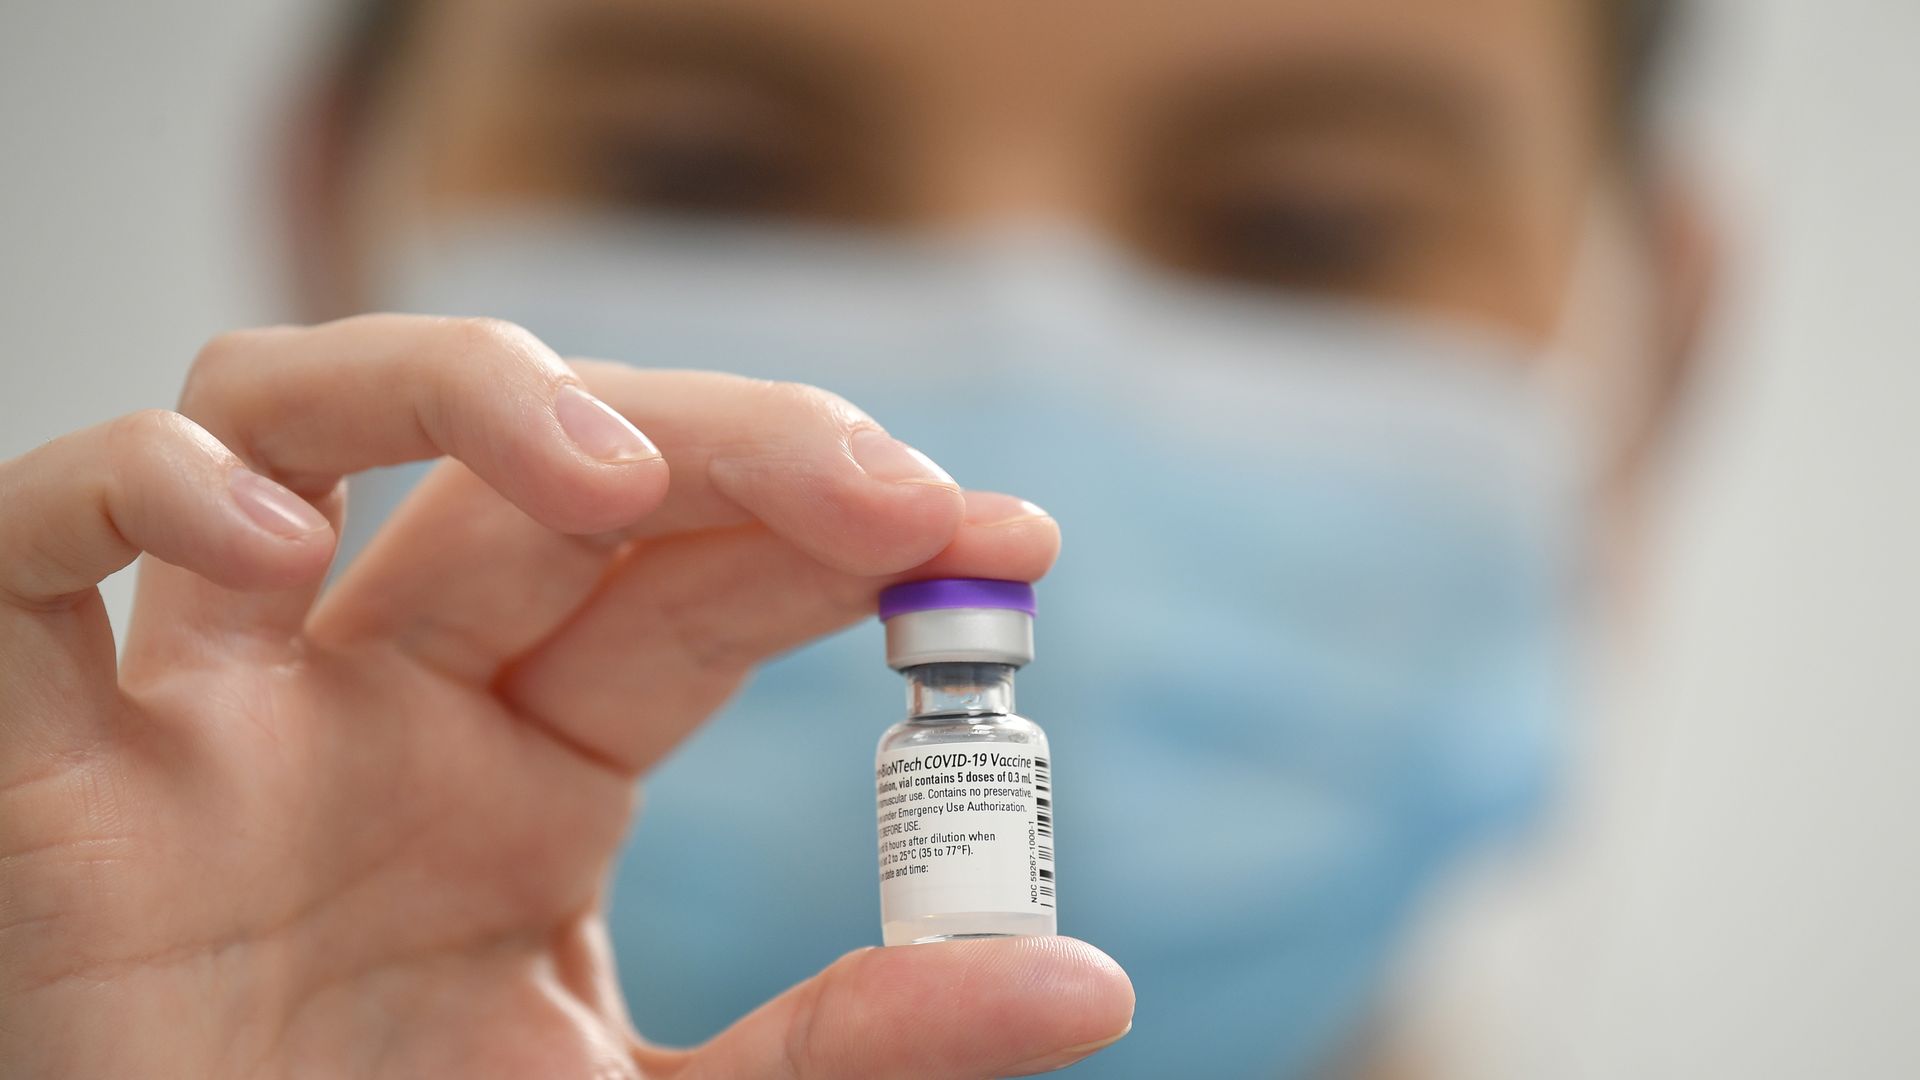 A member of staff poses with a phial of Pfizer-BioNTech Covid-19 vaccine at a vaccination health center on December 8, 2020 in Cardiff, United Kingdom. 